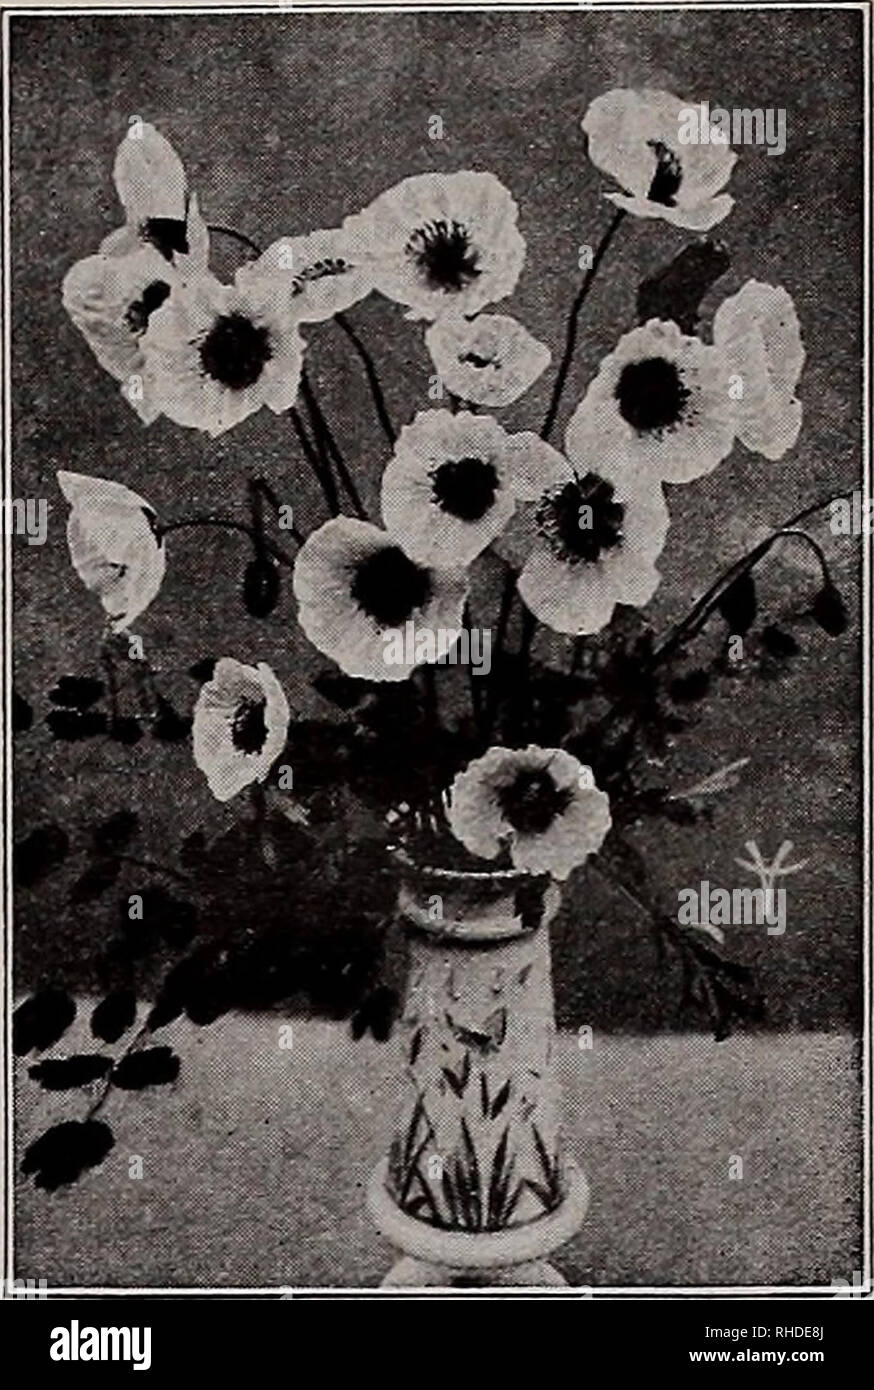 . Book for florists. Flowers Seeds Catalogs; Bulbs (Plants) Seedlings Catalogs; Vegetables Seeds Catalogs; Trees Seeds Catalogs; Horticulture Equipment and supplies Catalogs. LUPINUS Polyphyllus LYCHNIS Chalcedonica Seeds of Biennials and Hardy Perennials Trade pkt. Oz. POPPY Nudicaule or Iceland LUPINUS Folyphyllus—Continued Chocolate Soldier. Yellow, passing to chocolate.... 34 oz., 85c$0.35 C. M. Prichard. Pale salmon-orange with yellow. . 34 oz., $1.20 Luteus. A strain of varying yellow shades, of the true polyphyllus type 34 oz., 60c Salmoneus. Tender salmon shades Sunshine. Golden yellow Stock Photo